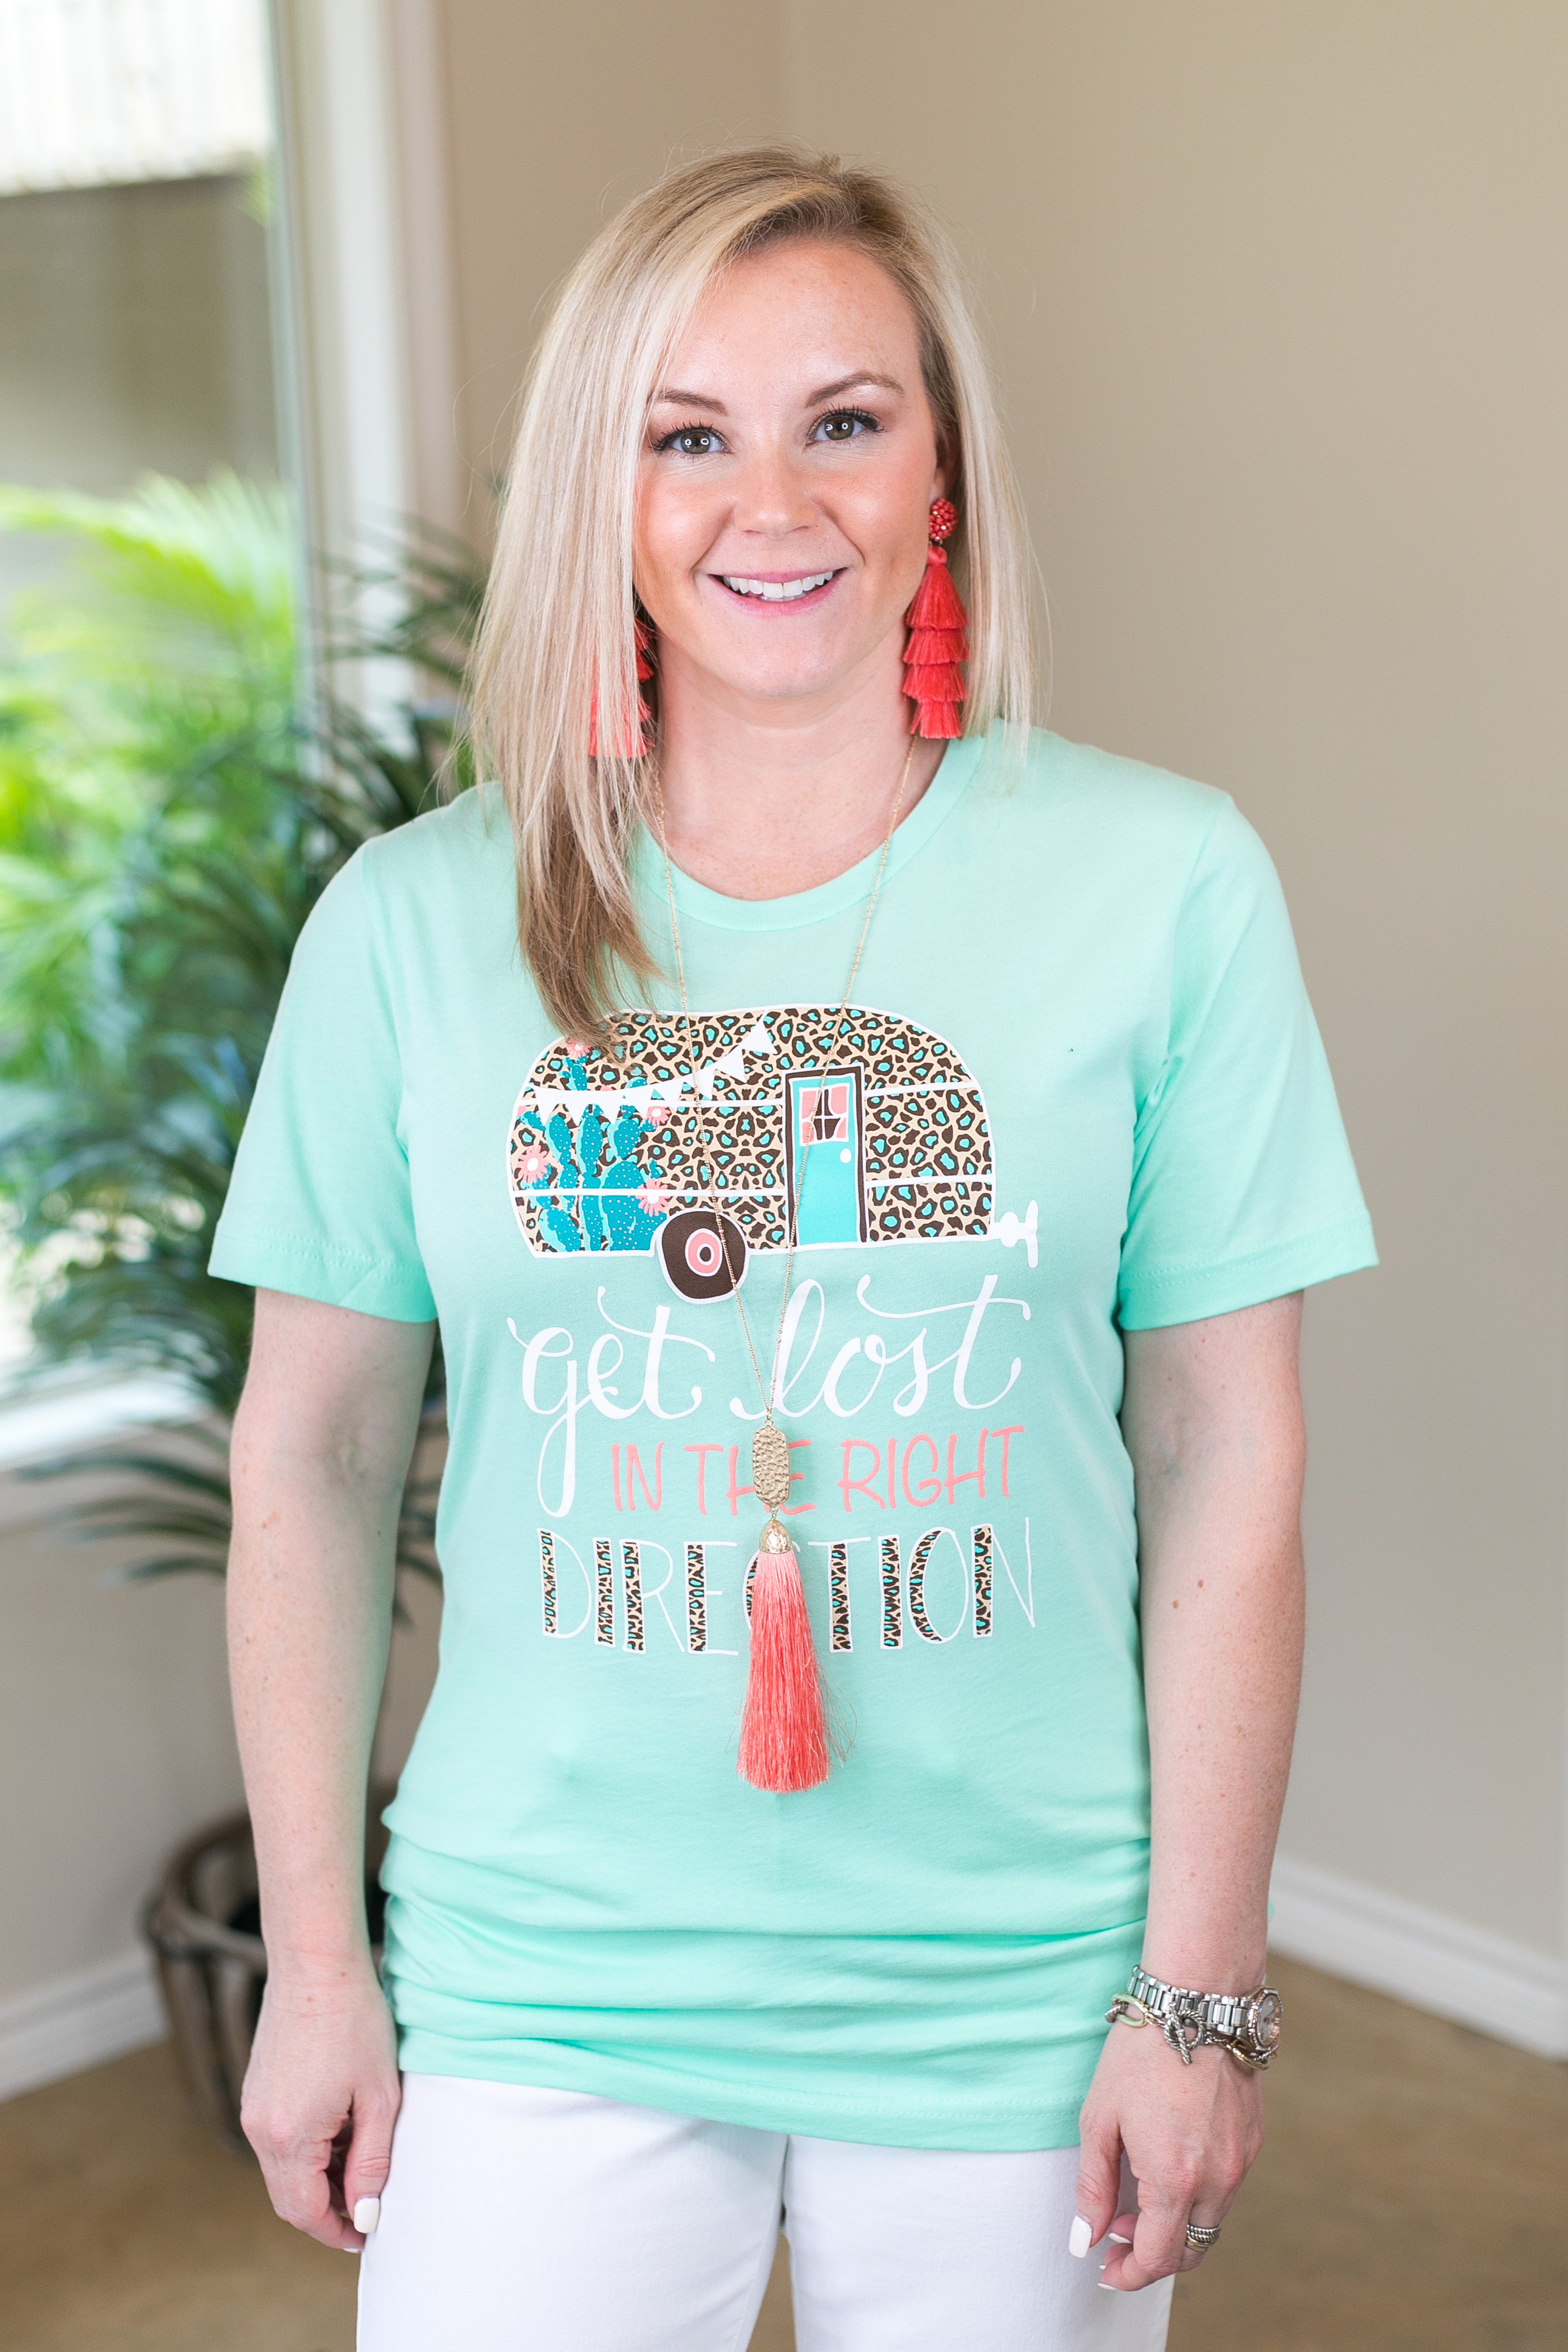 Get Lost In The Right Direction Camper Short Sleeve Tee Shirt in Mint - Giddy Up Glamour Boutique